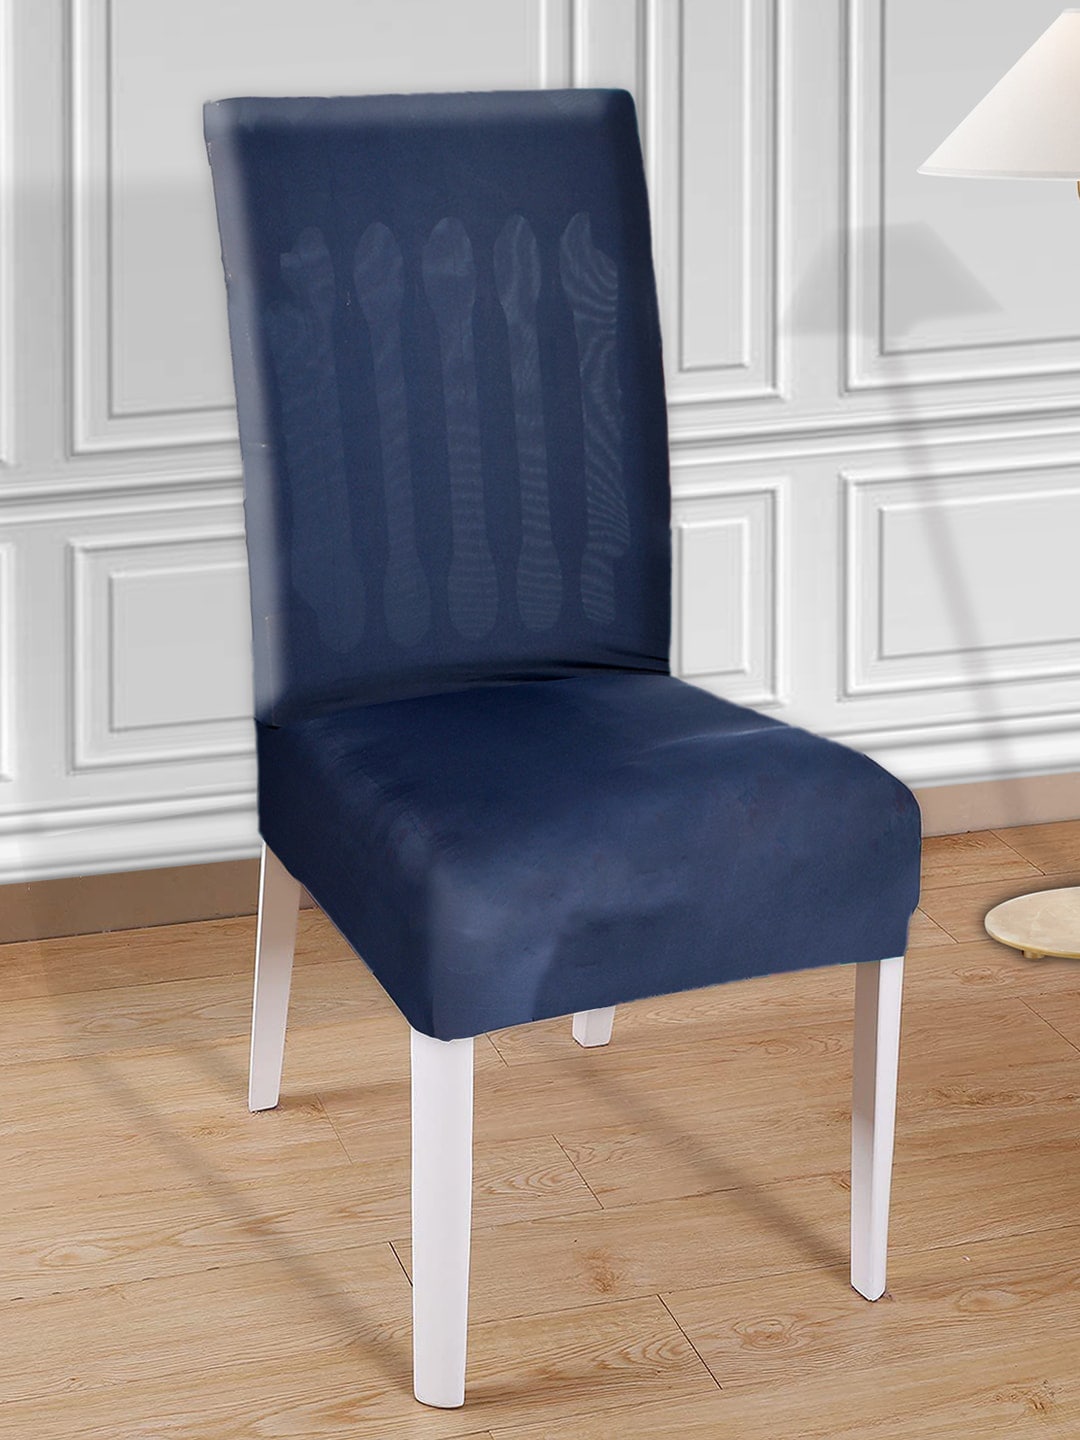 Kuber Industries Set of 6 Blue printed Chair covers Price in India